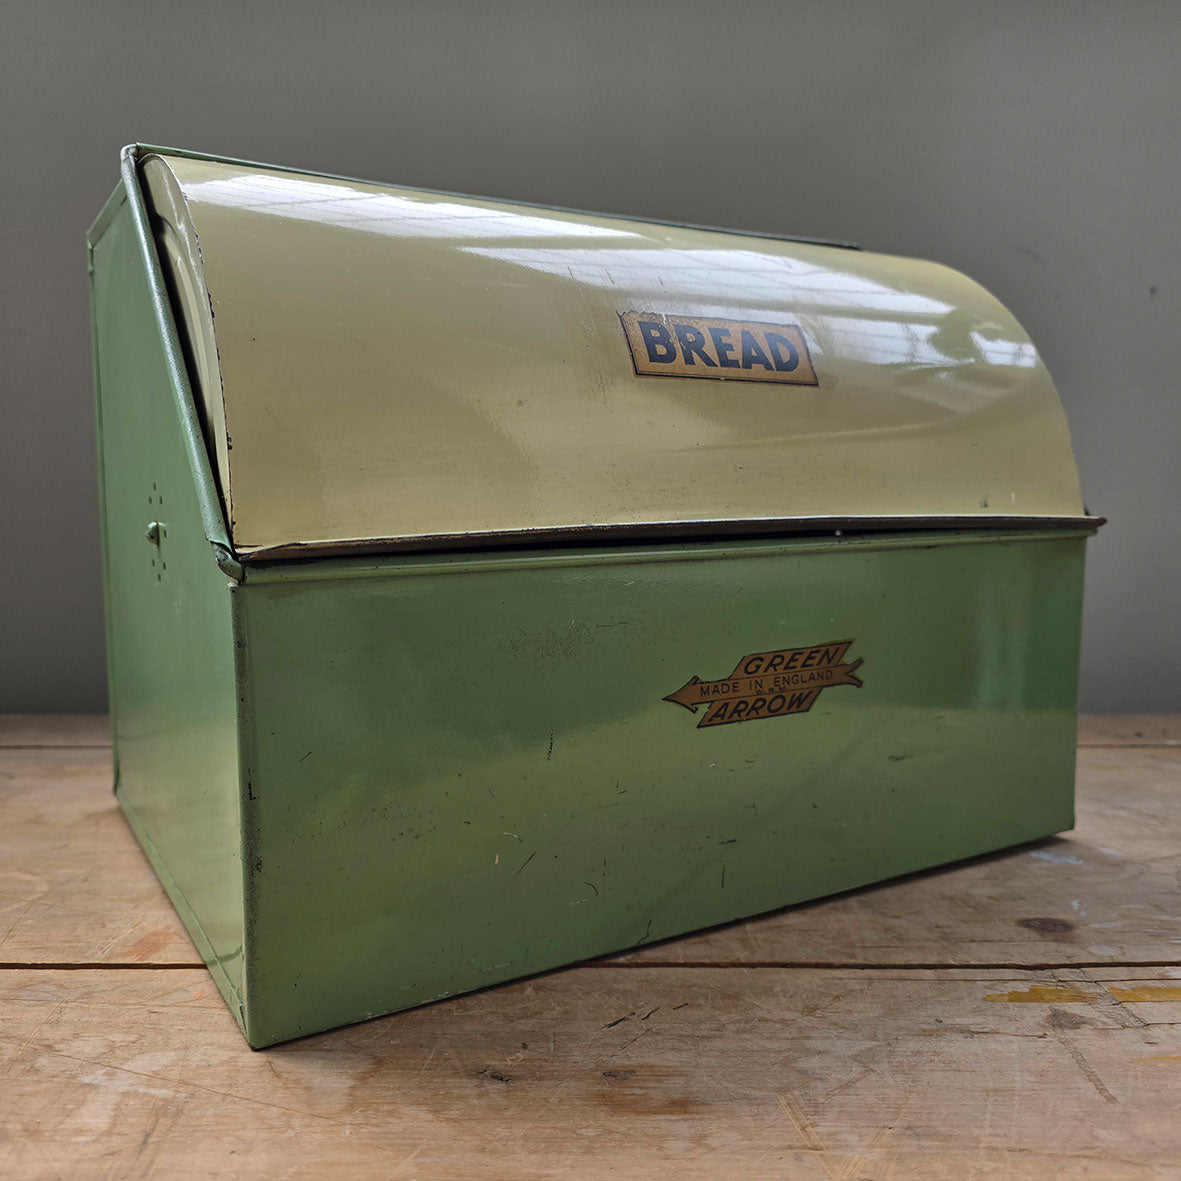 A Vintage Green Arrow bread bin in a fab duck egg green and cream combo, and still having its 'BREAD' and 'Green Arrow' water slide stickers to the front. A great looking item for the vintage kitchen - SHOP NOW - www.intovintage.co.uk